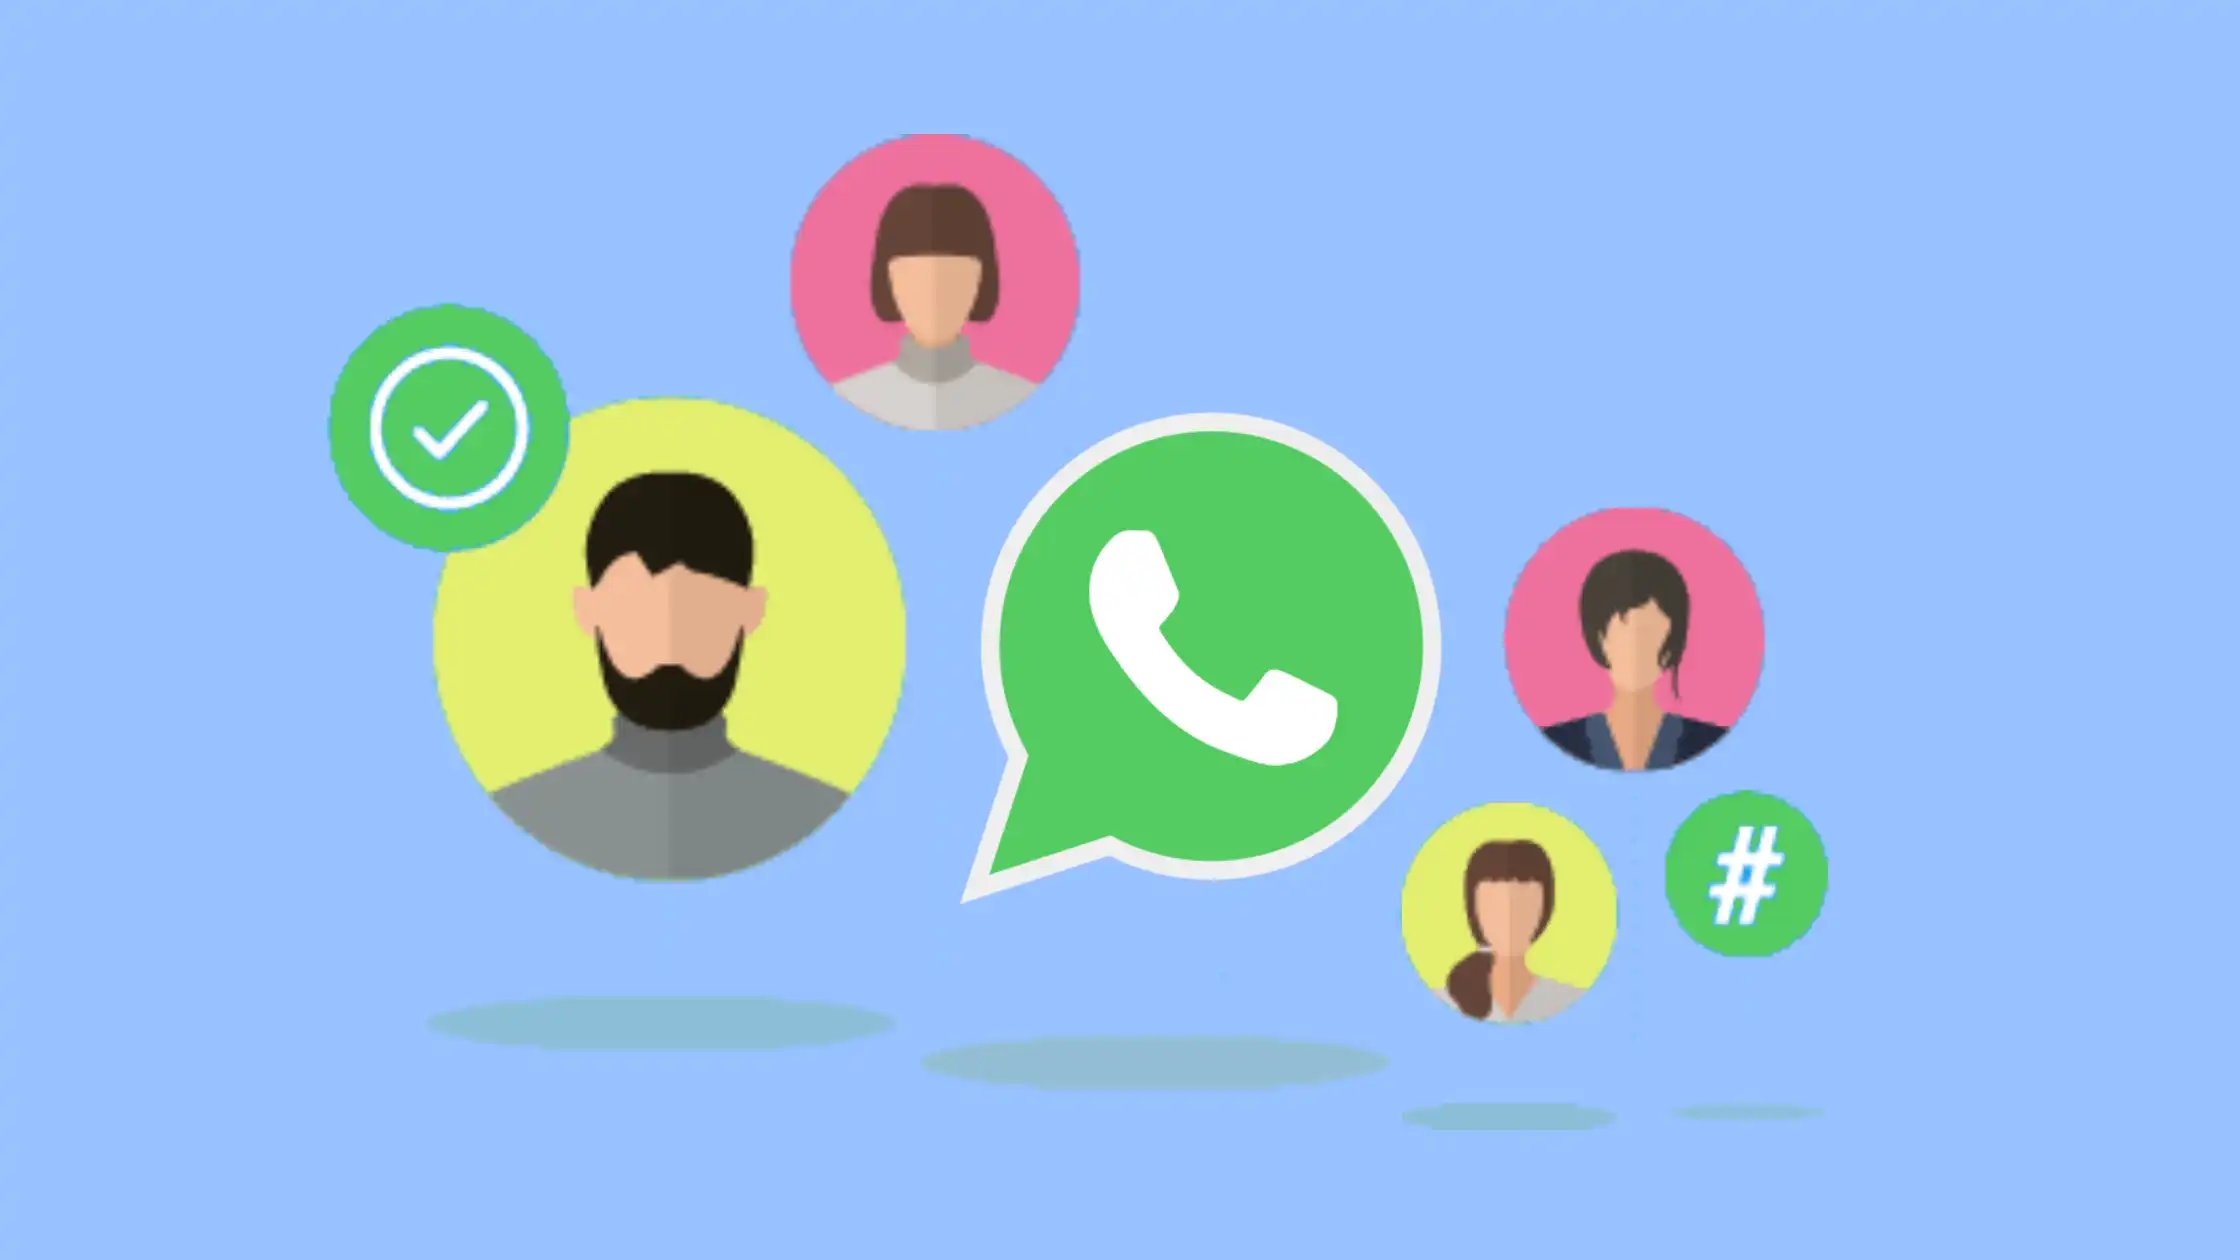 How Can Recruiters Use WhatsApp for Recruiting Talent?